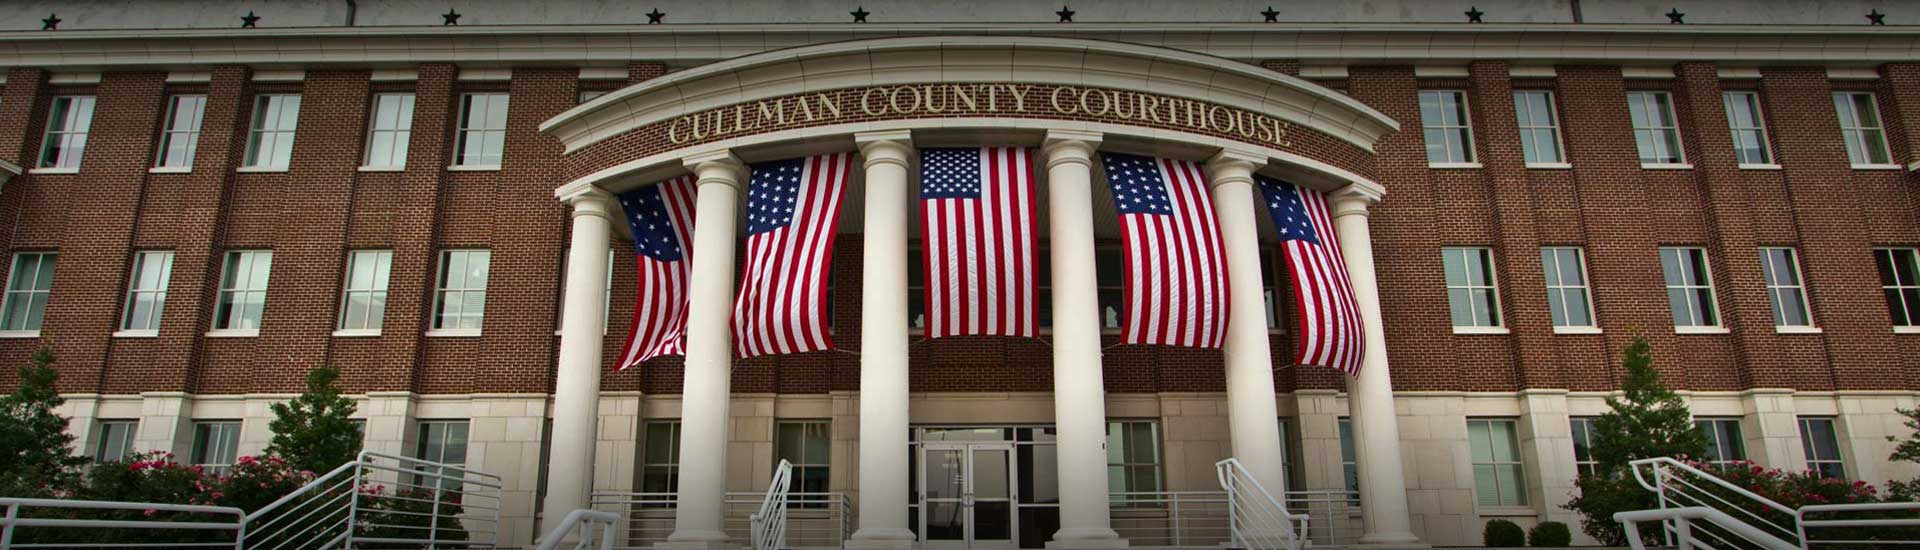 Cullman County Courthouse porch with Flags Displayed from highway 31 view